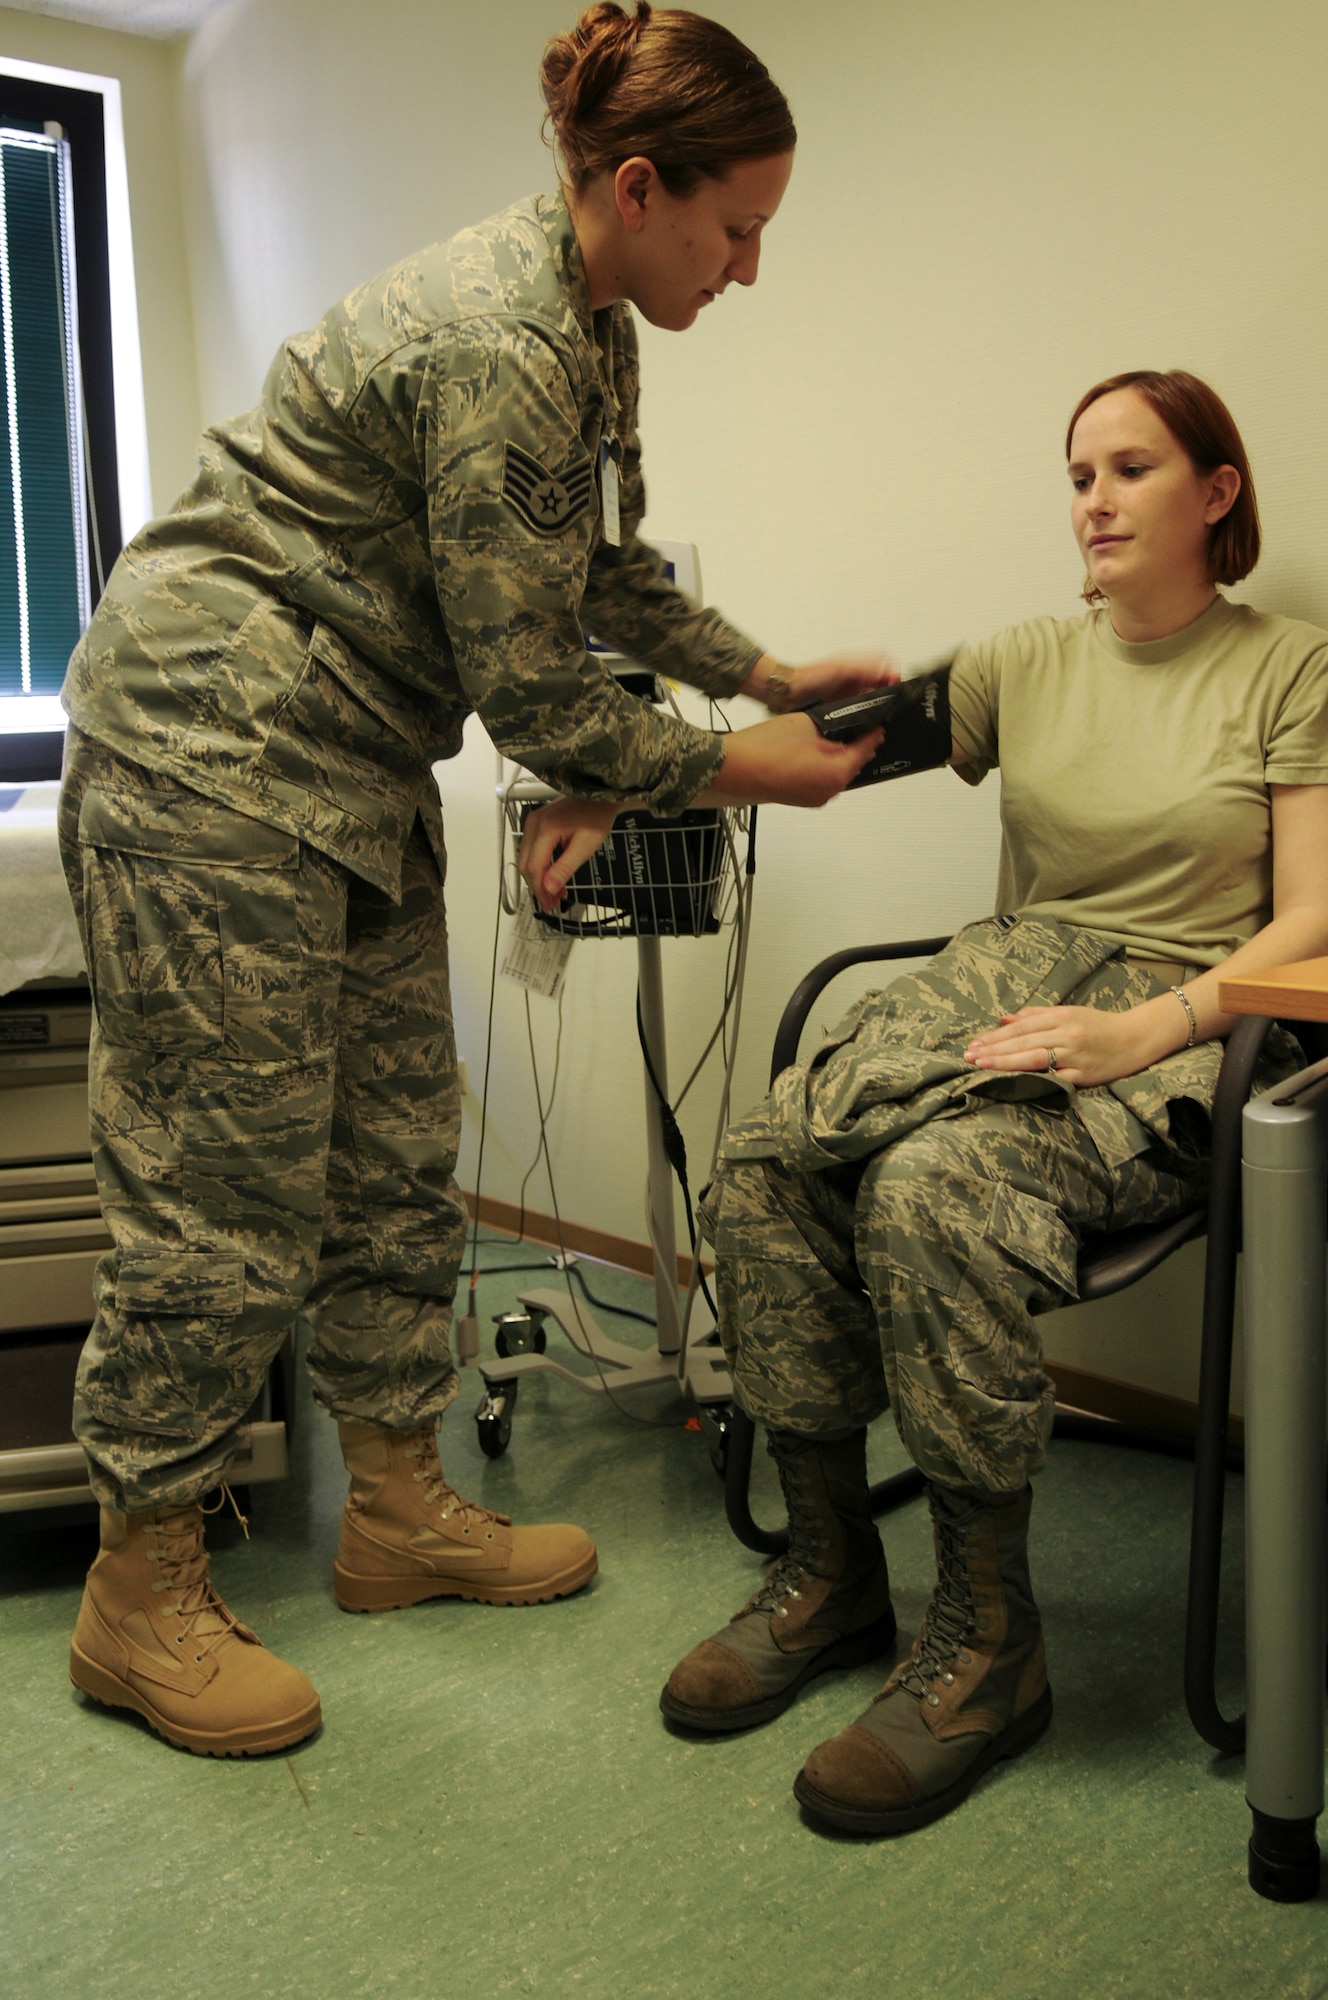 United States Air Force Staff Sgt. Laura Brown, 435th Medical Group, noncommissioned officer in charge of the Physical Health Assessment Office, takes the blood pressure of United States Air Force Airman 1st Class Jillian Chubet, 435th MDG medical technician, May 14, 2009, Ramstein Air Base, Germany. The Family Medicine Clinic has about 70,000 patients they see annually. (U.S. Air Force photo by Airman 1st Class Alexandria Mosness)